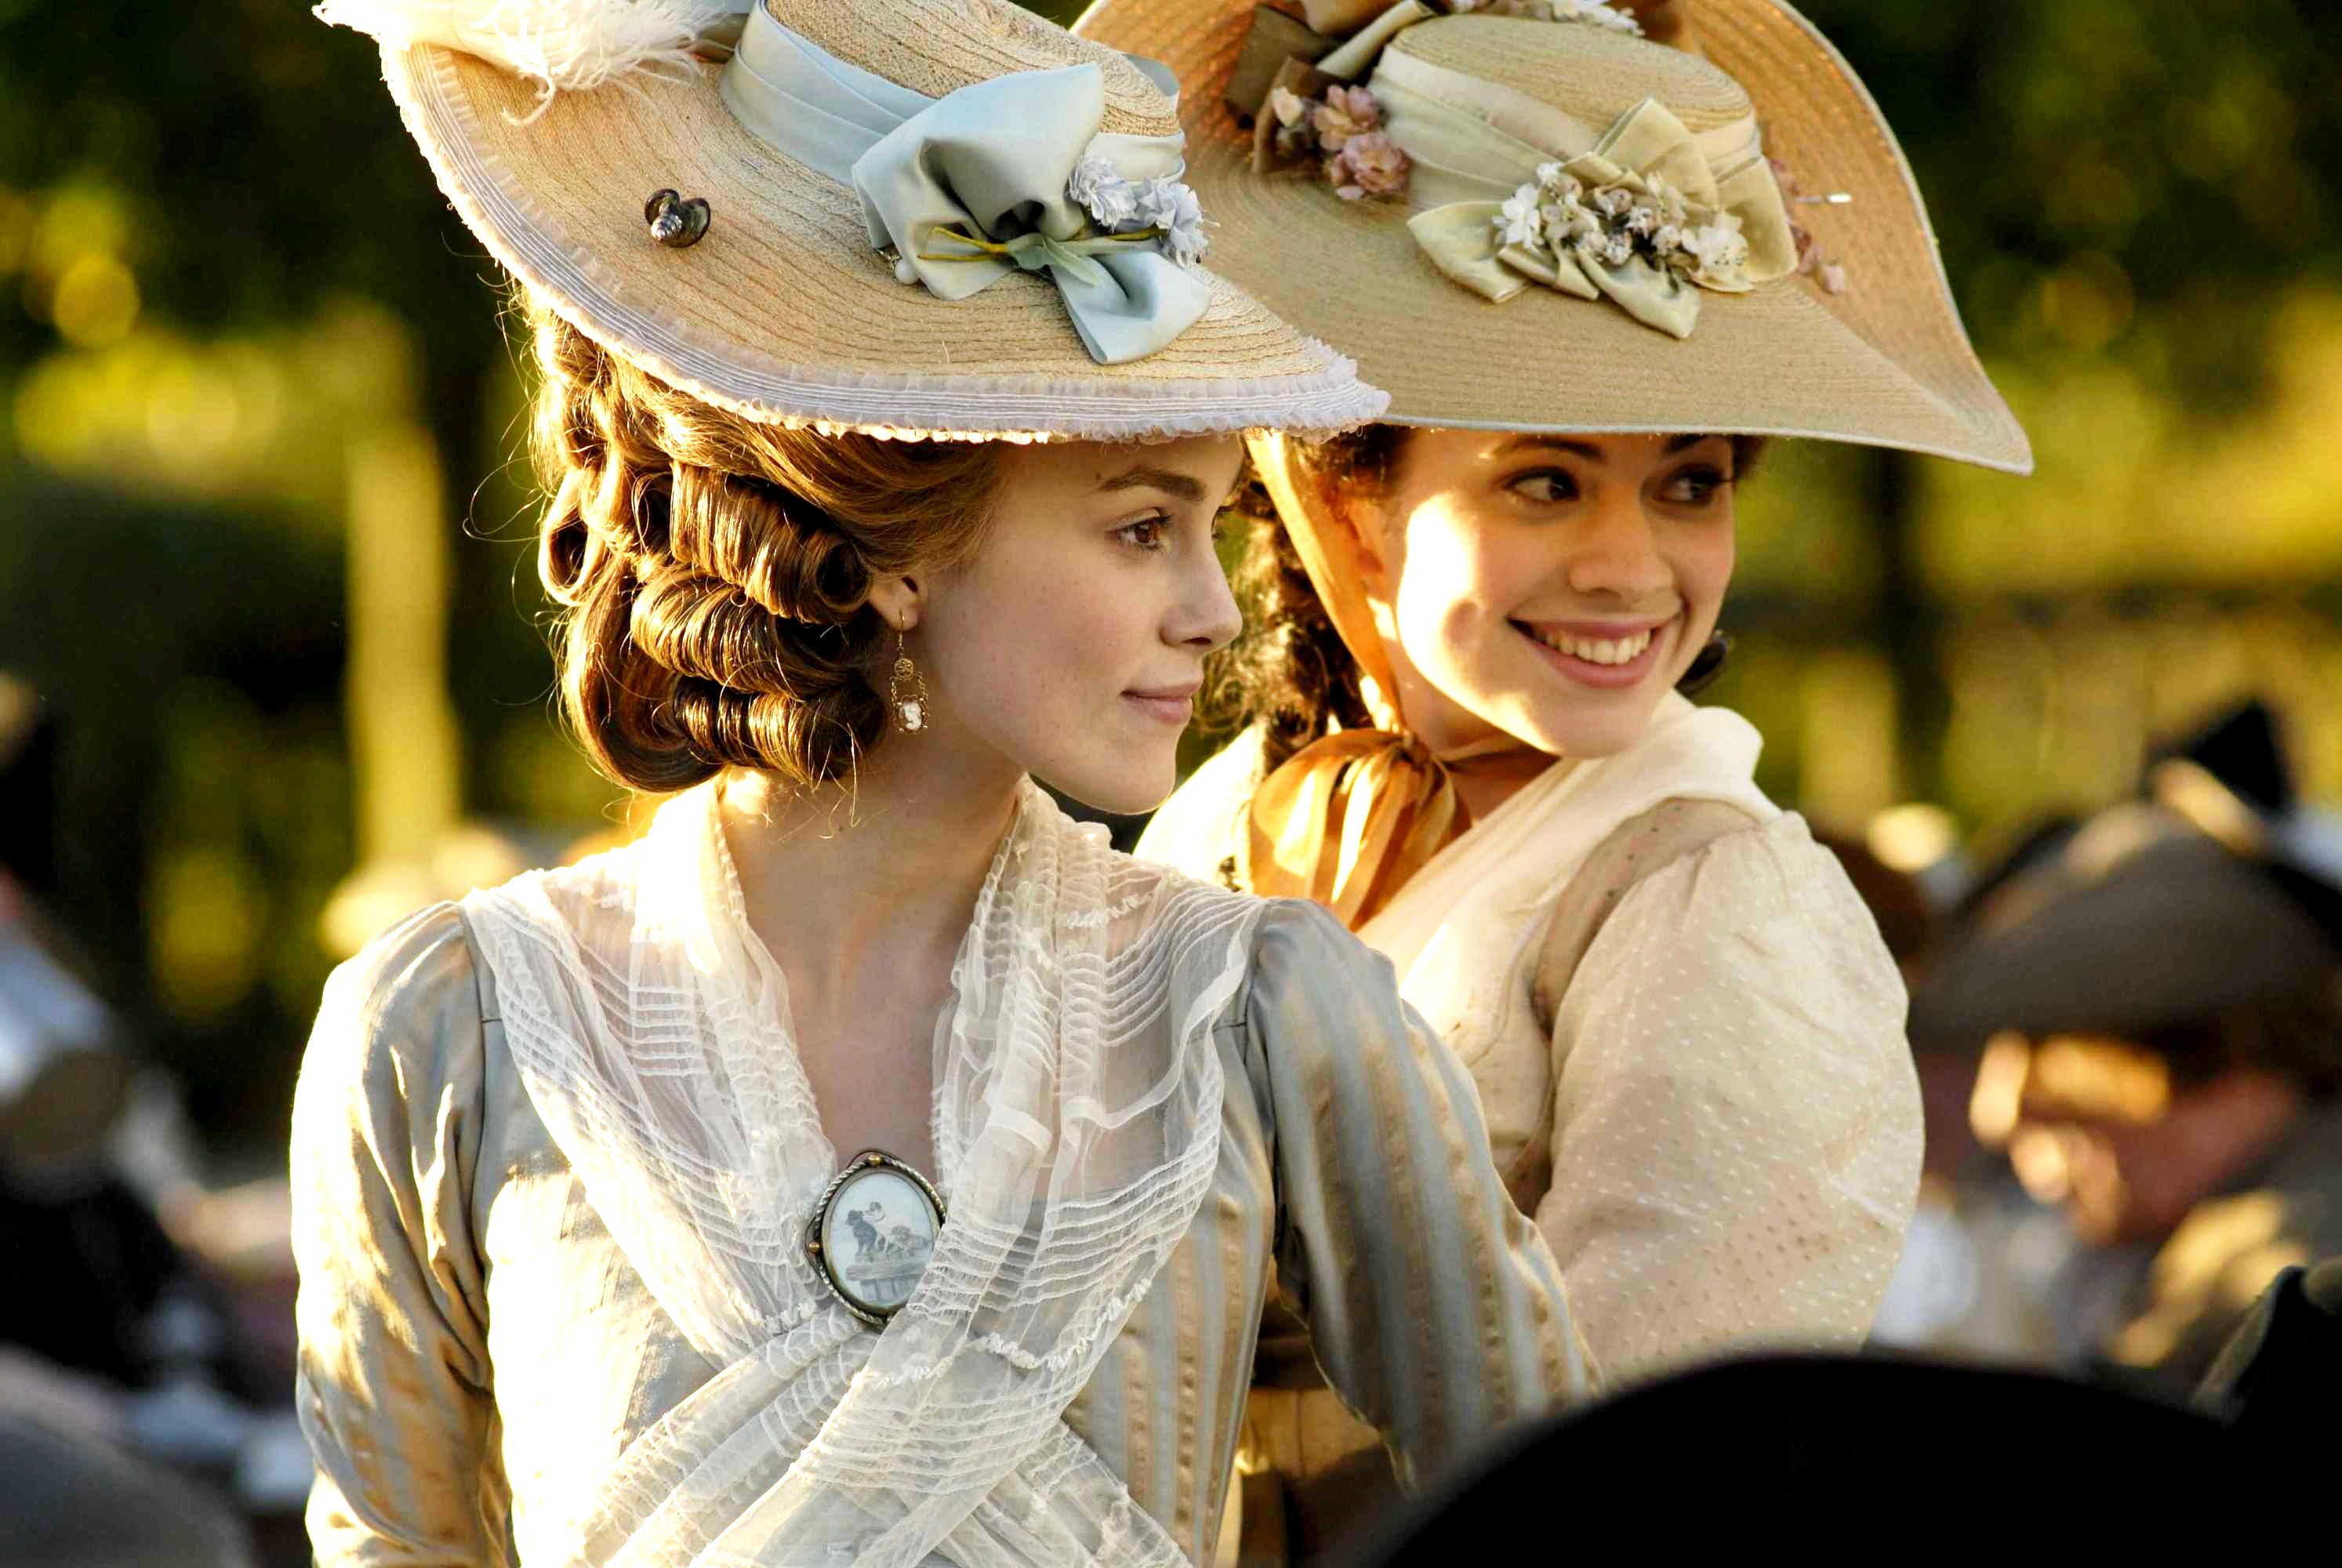 Keira Knightley stars as Georgiana Spencer, the Duchess of Devonshire and Hayley Atwell stars as Bess in Paramount Vantage's The Dutchess (2008). Photo credit by Nick Wall.